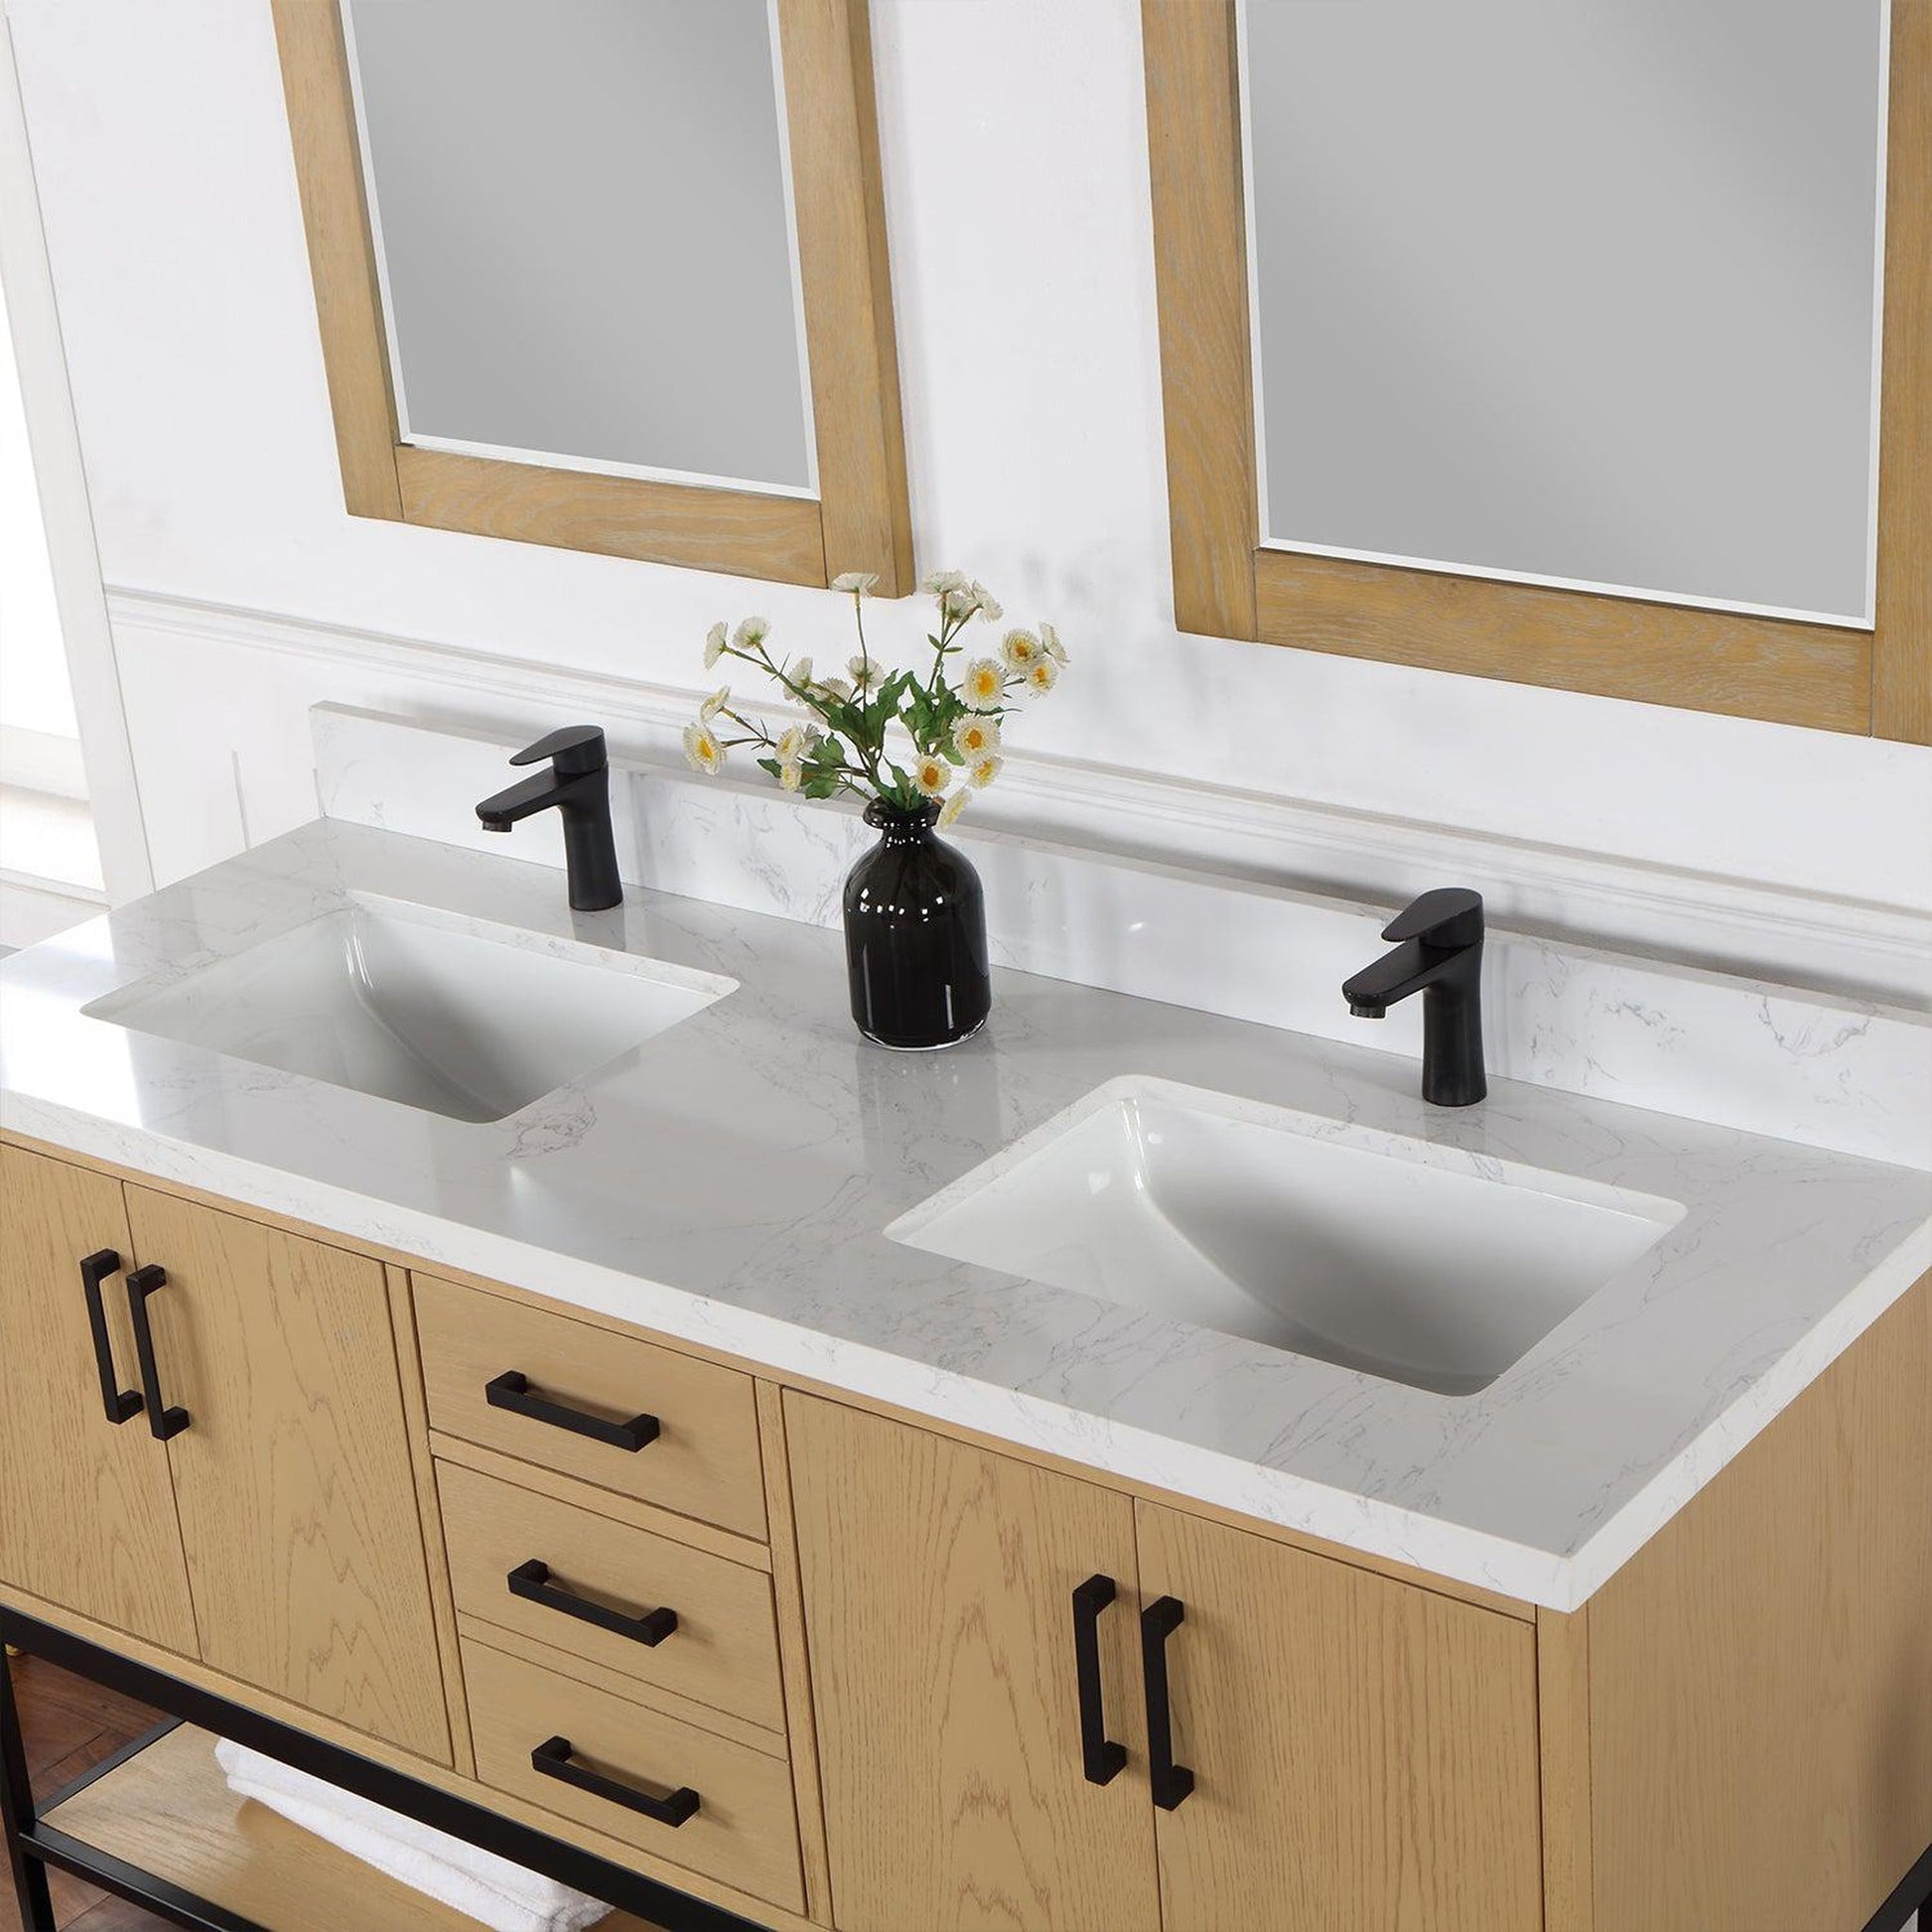 Altair Wildy 60" Washed Oak Freestanding Double Bathroom Vanity Set With Mirror, Stylish Composite Grain White Stone Top, Two Rectangular Undermount Ceramic Sinks, Overflow, and Backsplash